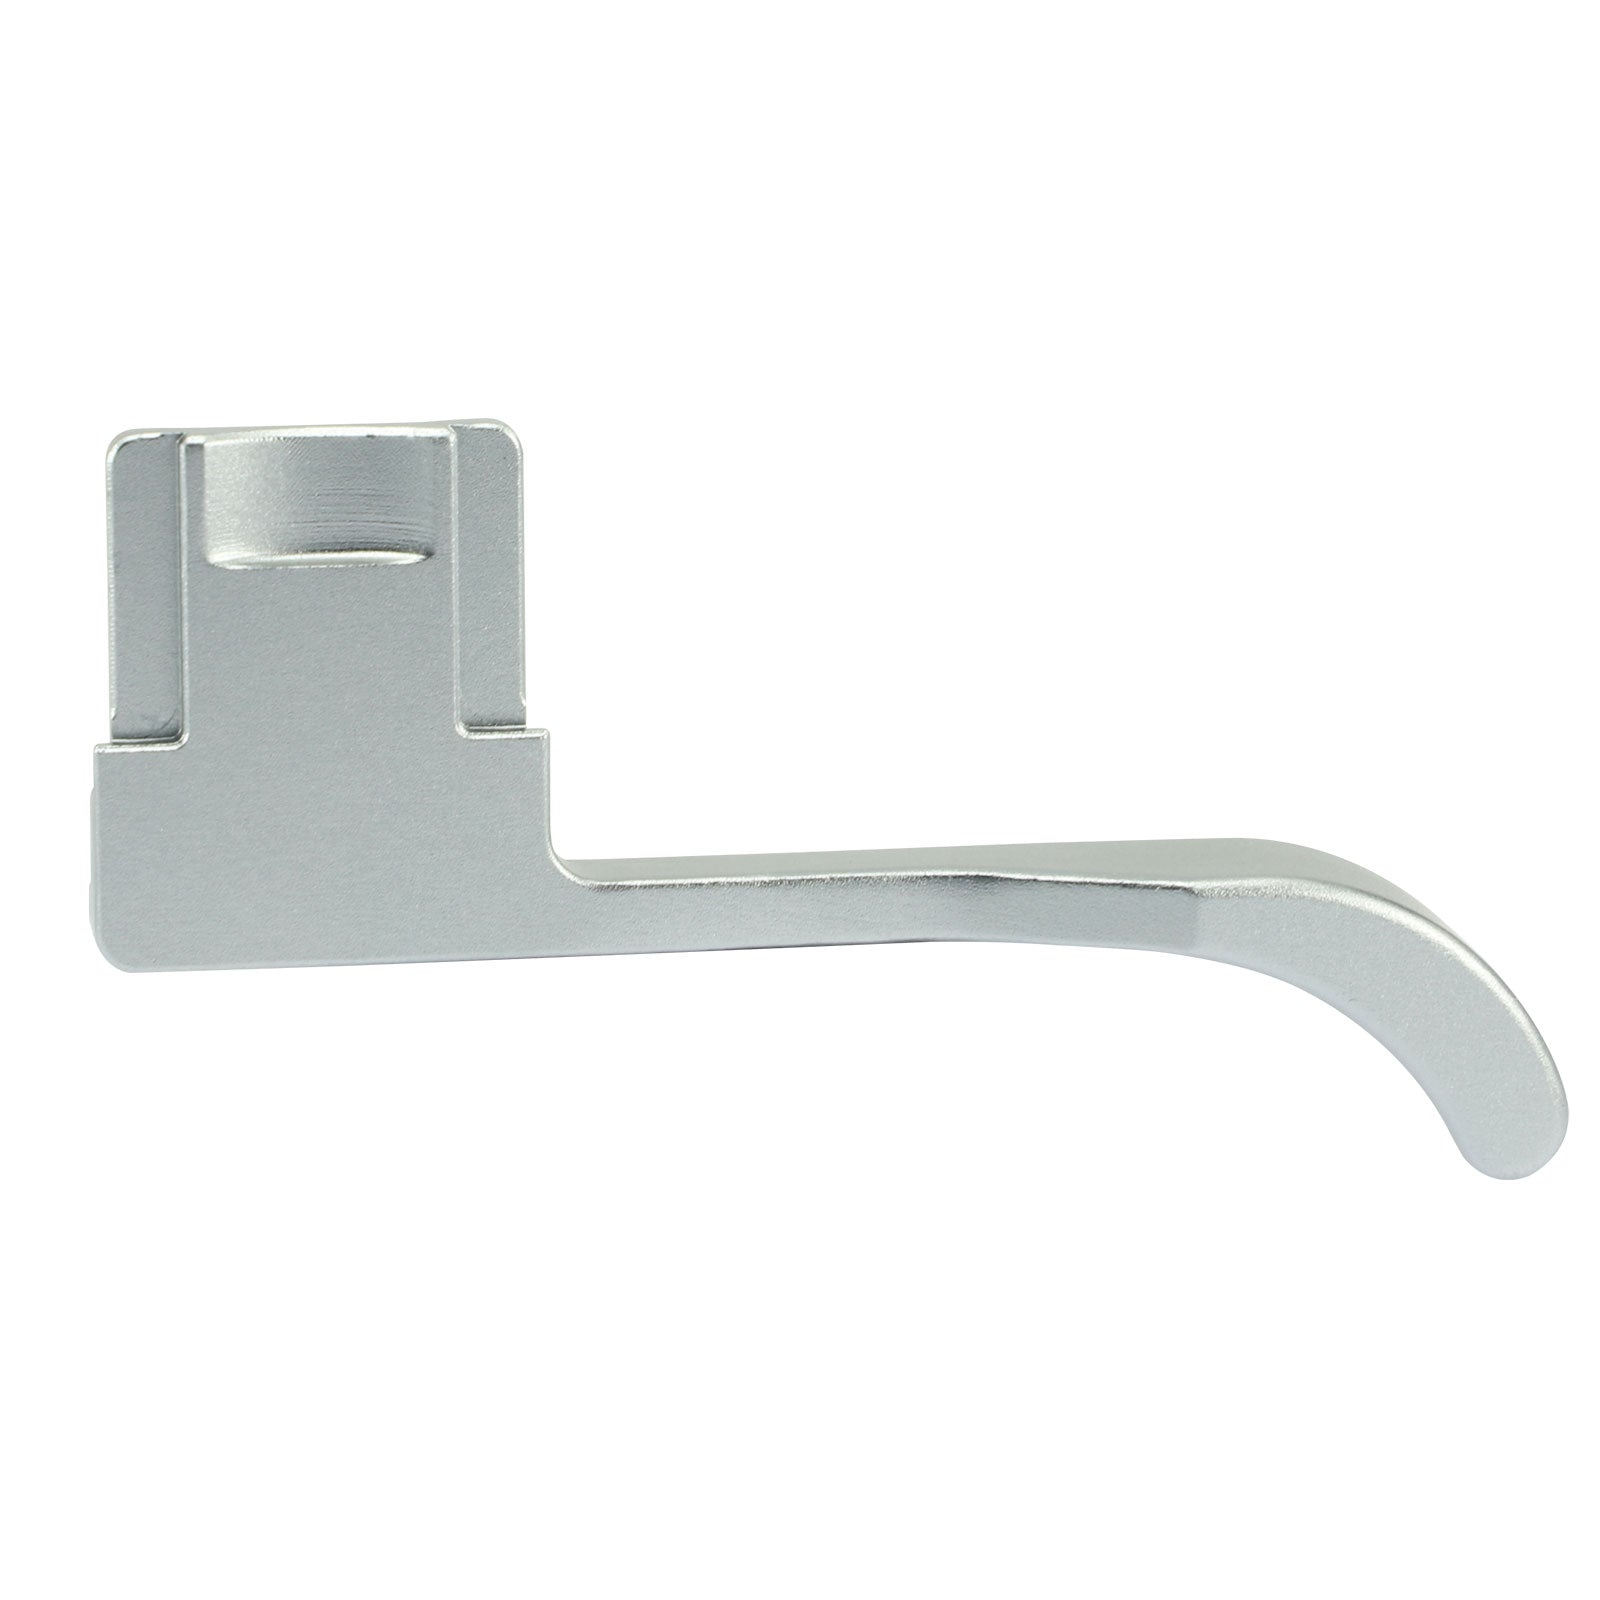 Haoge THB-A7CIIS Metal Hot Shoe Thumb Up Rest Hand Grip for Sony α7CII,Alpha 7CR,ILCE-7Cii,Camera Accessories Silver